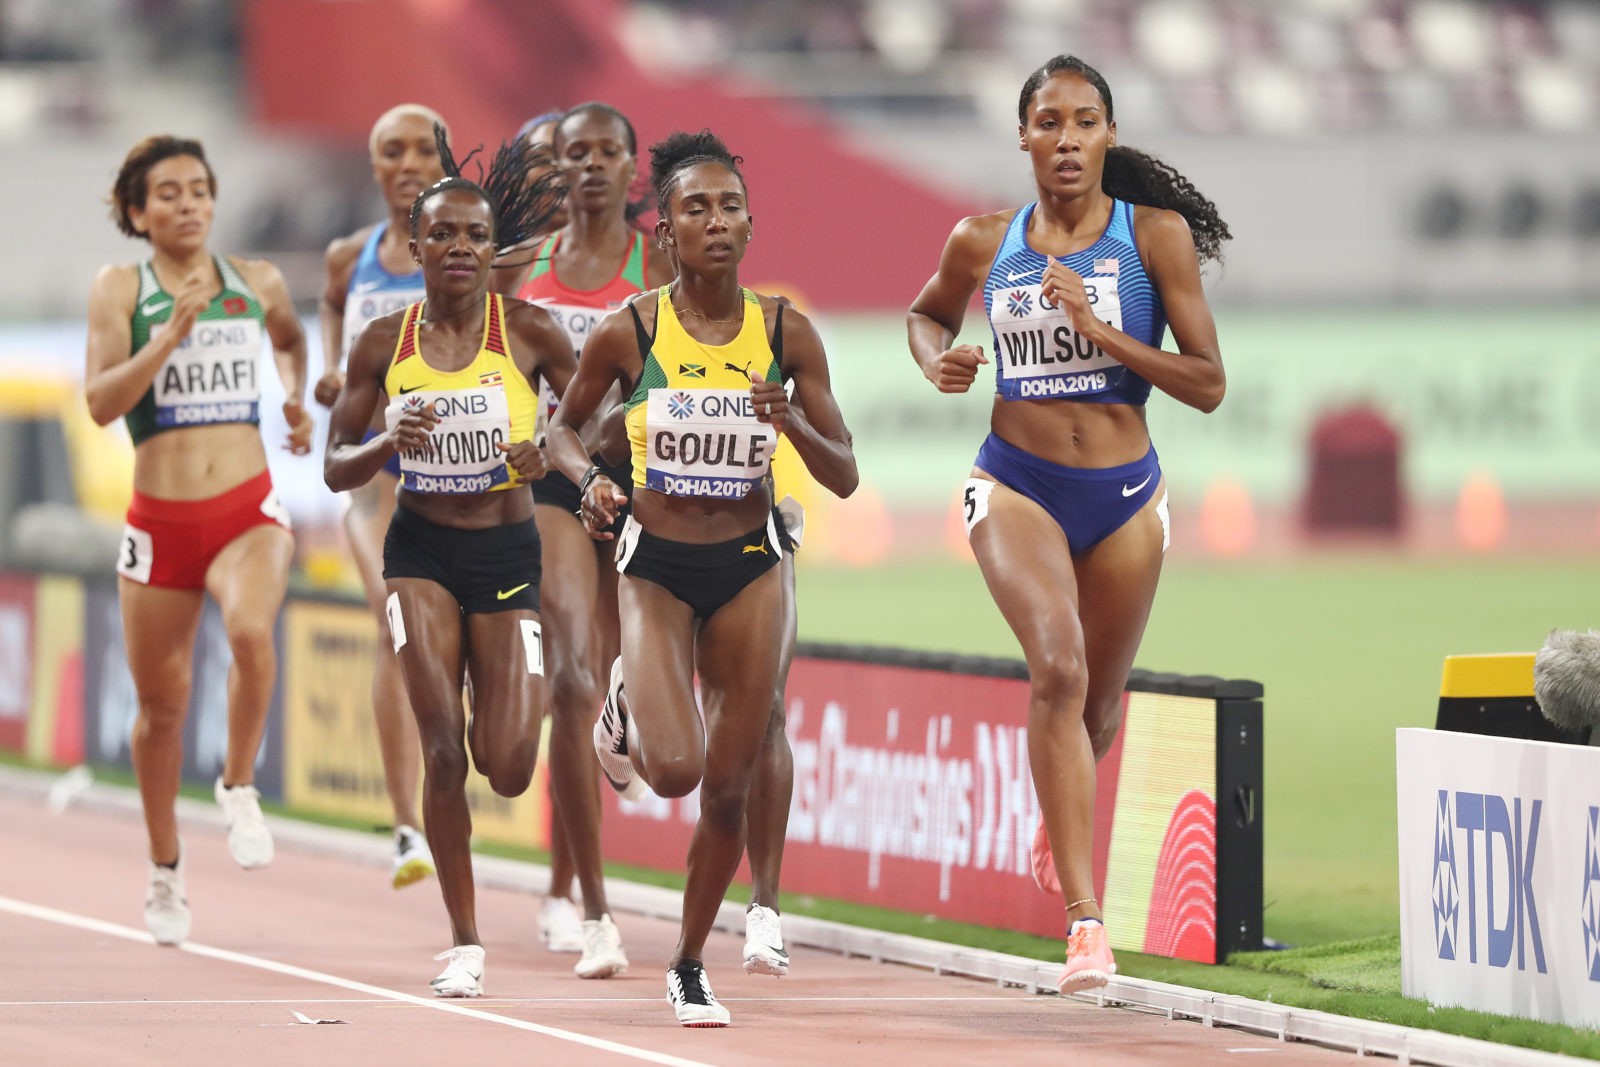 Halimah Nakaayi of Uganda and Ajee Wilson of the United States competes in the Women's 800 metres final during day four of 17th IAAF World Athletics Championships Doha 2019 at Khalifa International Stadium on September 30, 2019 in Doha, Qatar. (Photo by Andy Lyons/Getty Images for IAAF)